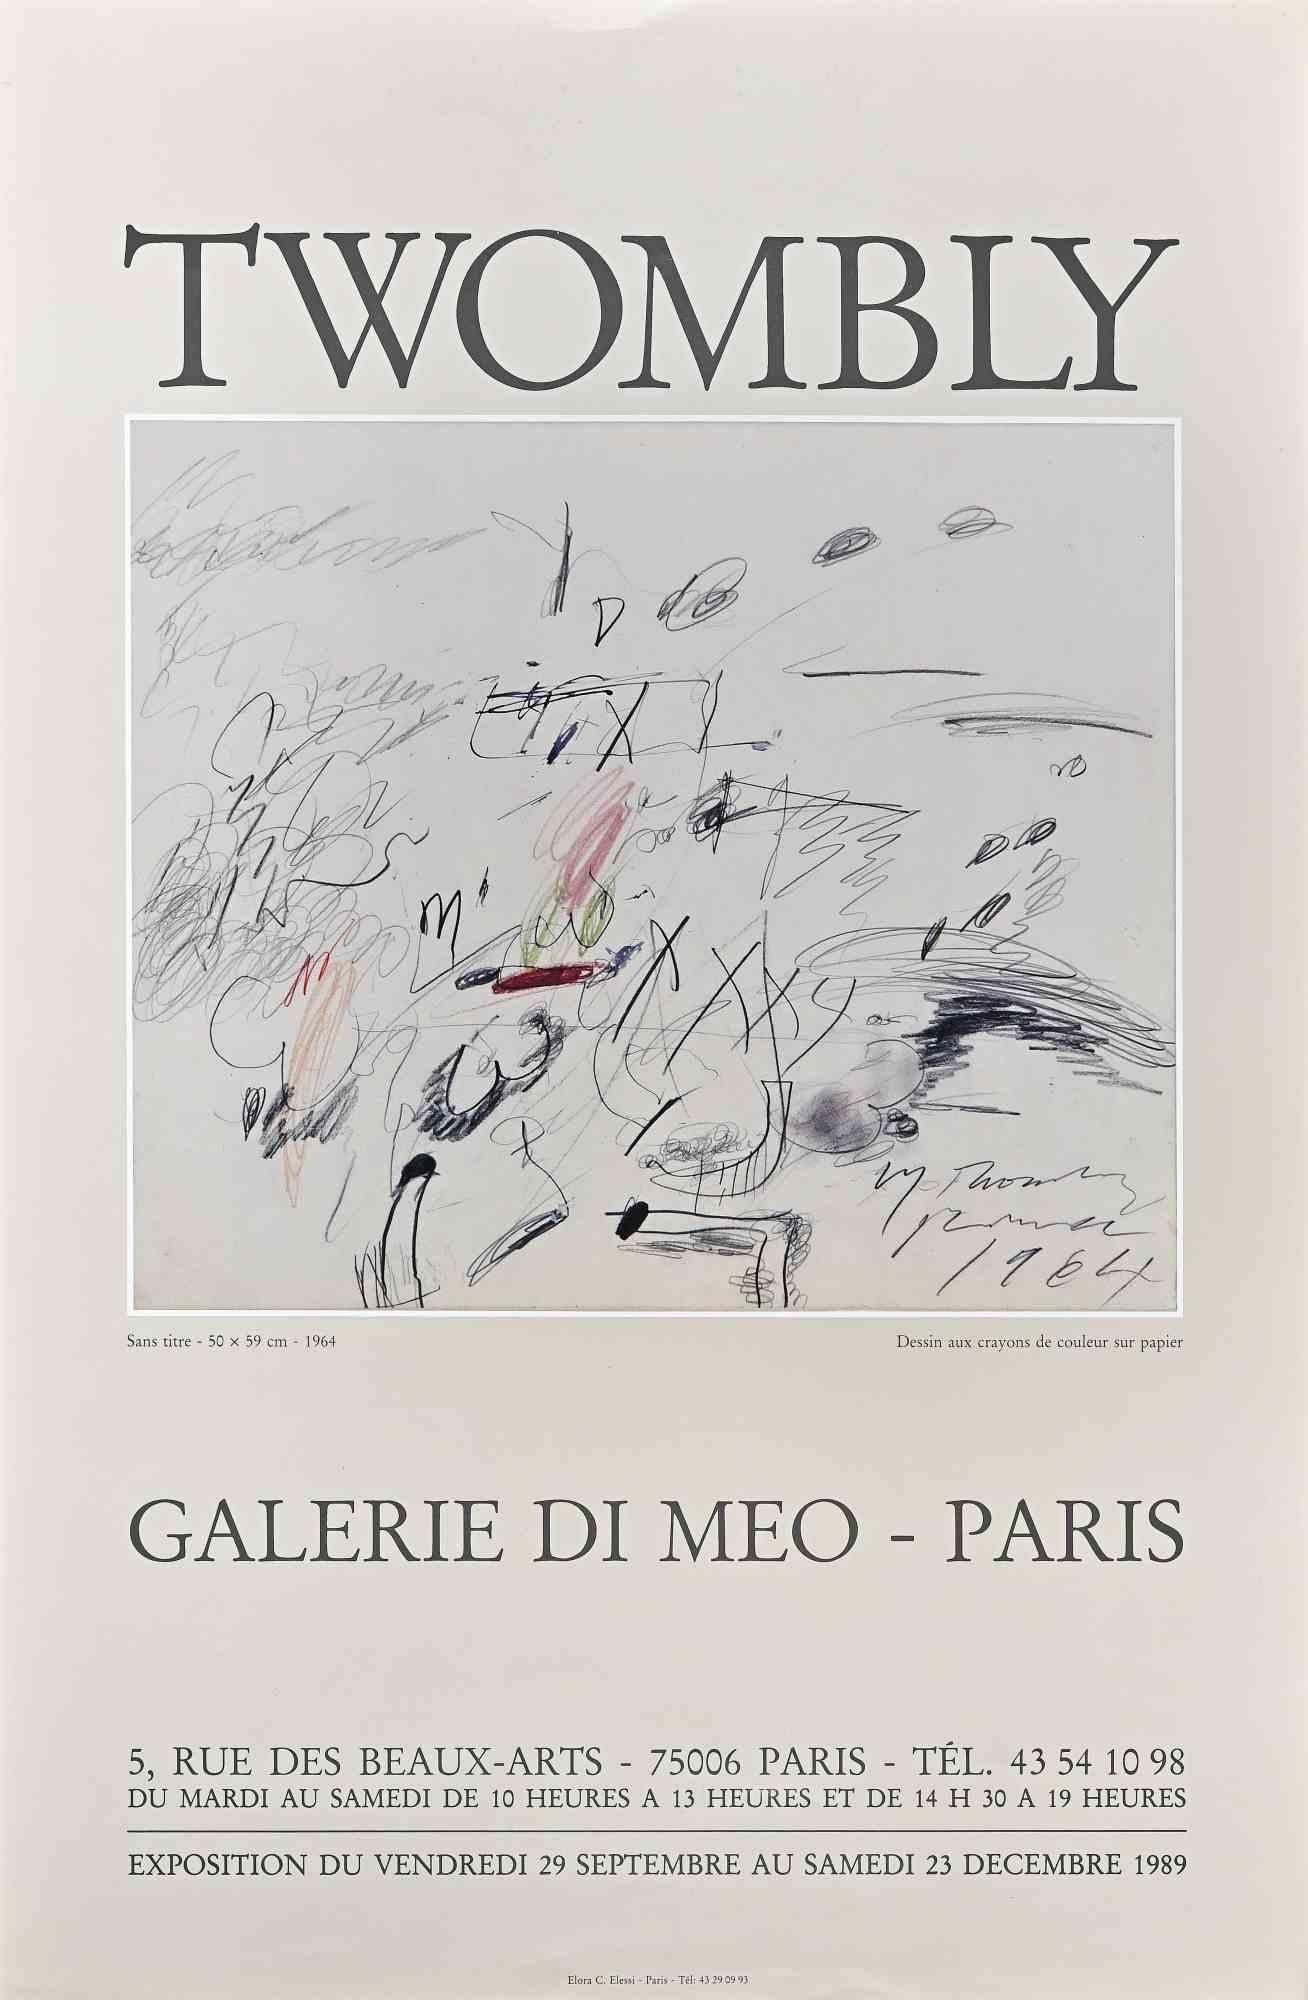 Cy Twombly Abstract Print - Twombly Exhibition - Galerie Di Meo - 1989